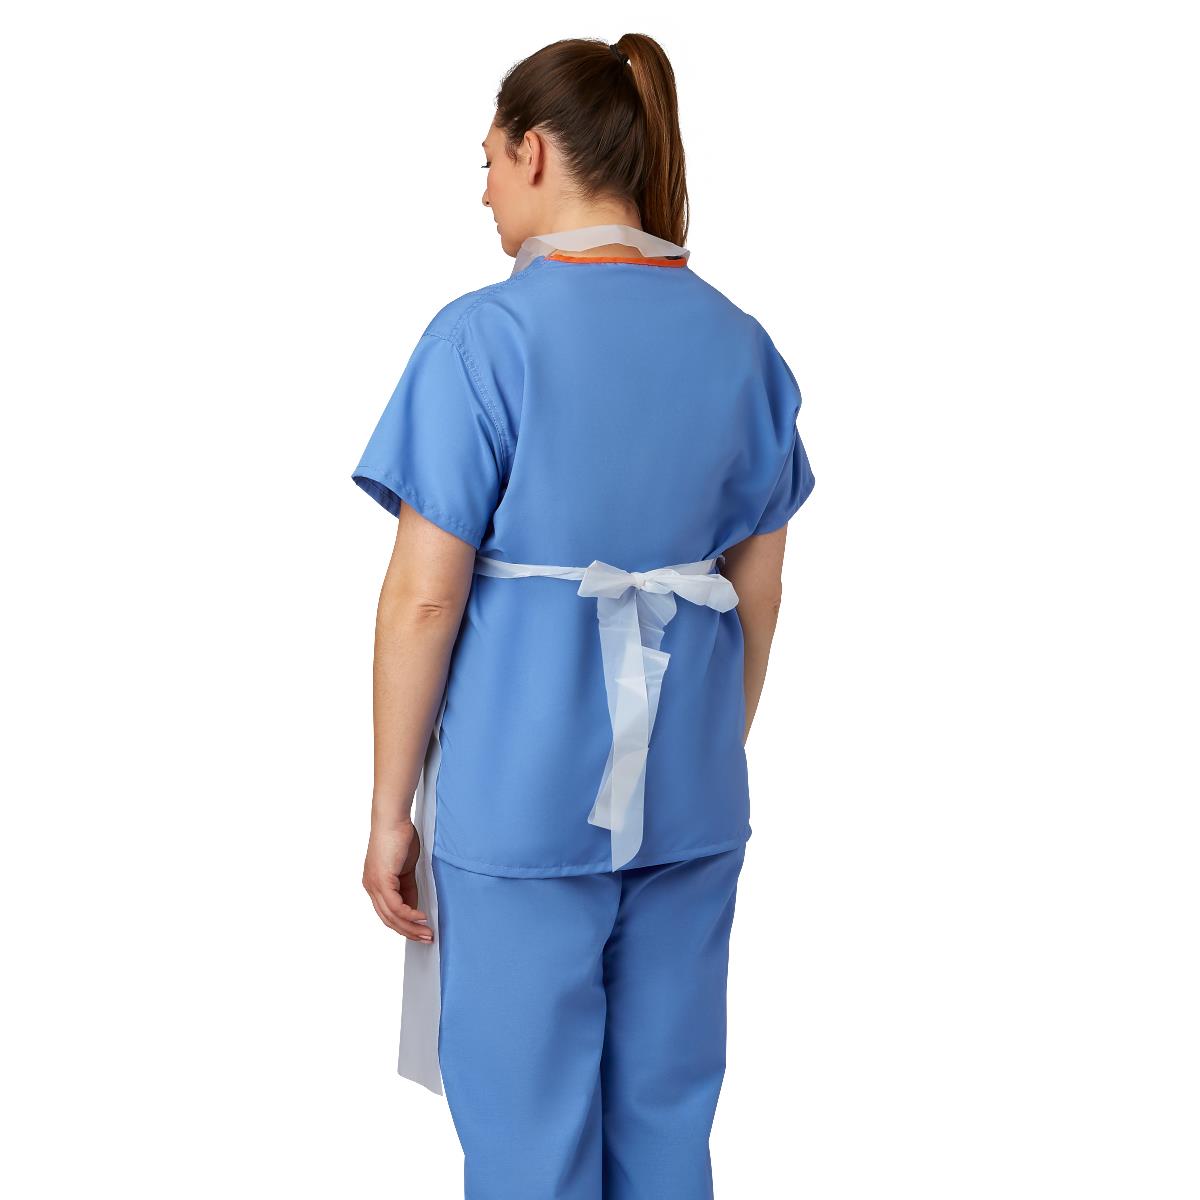 Protective Polythylene Disposable Aprons, 24in x 42in